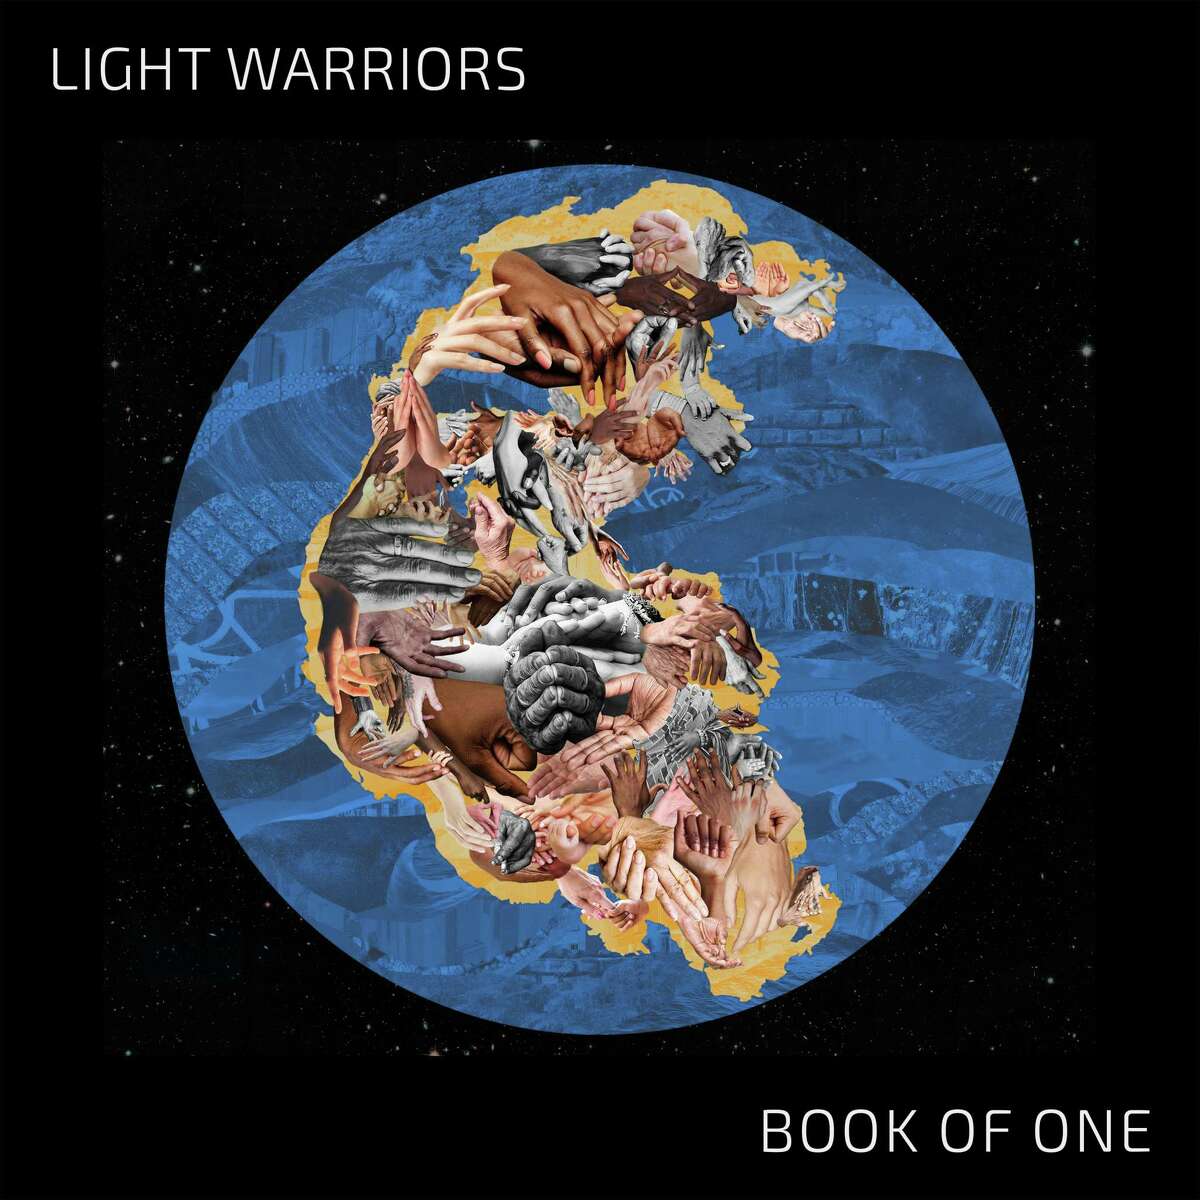 Connecticut band Light Warriors created the "Book of One" album to promote "oneness" and combat hunger.